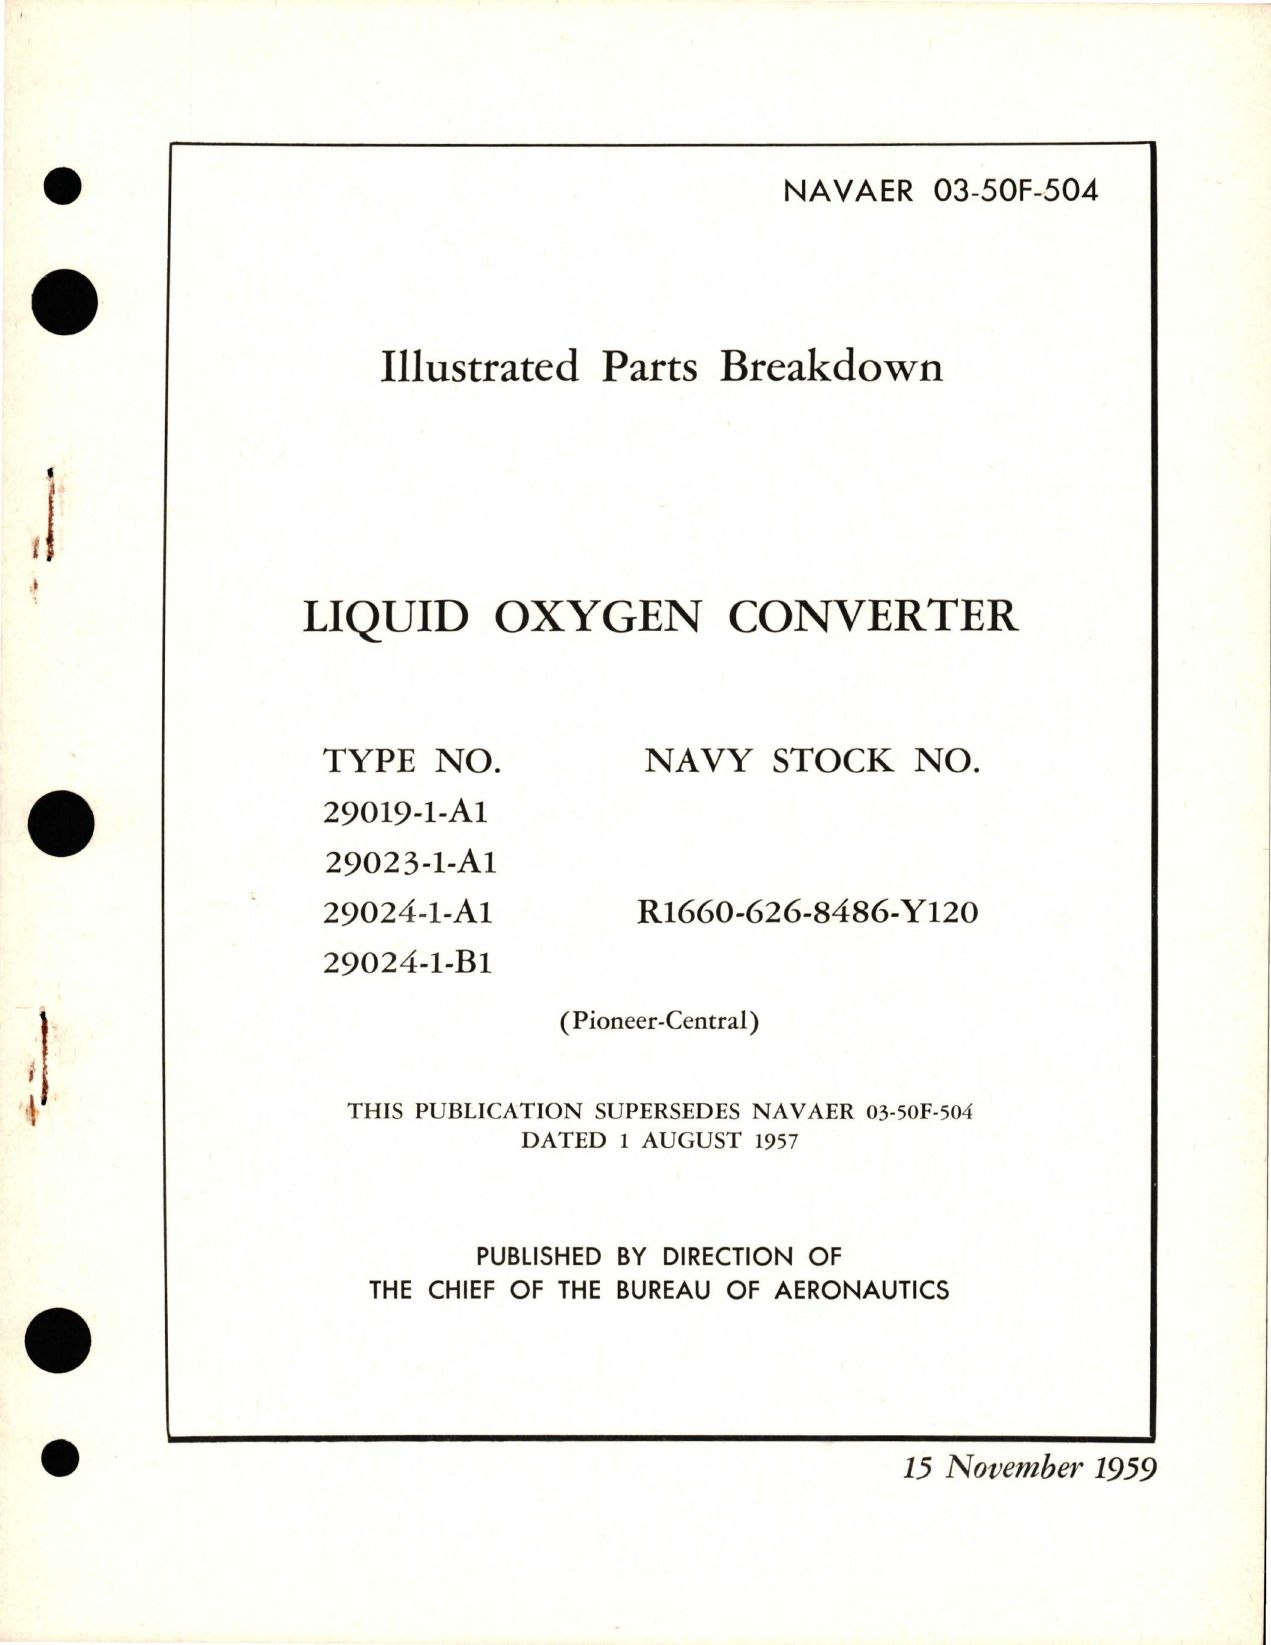 Sample page 1 from AirCorps Library document: Illustrated Parts Breakdown for Liquid Oxygen Converter - Type - 29019-1-A1, 29023-1-A1, 29024-1-A1, and 29024-1-B1